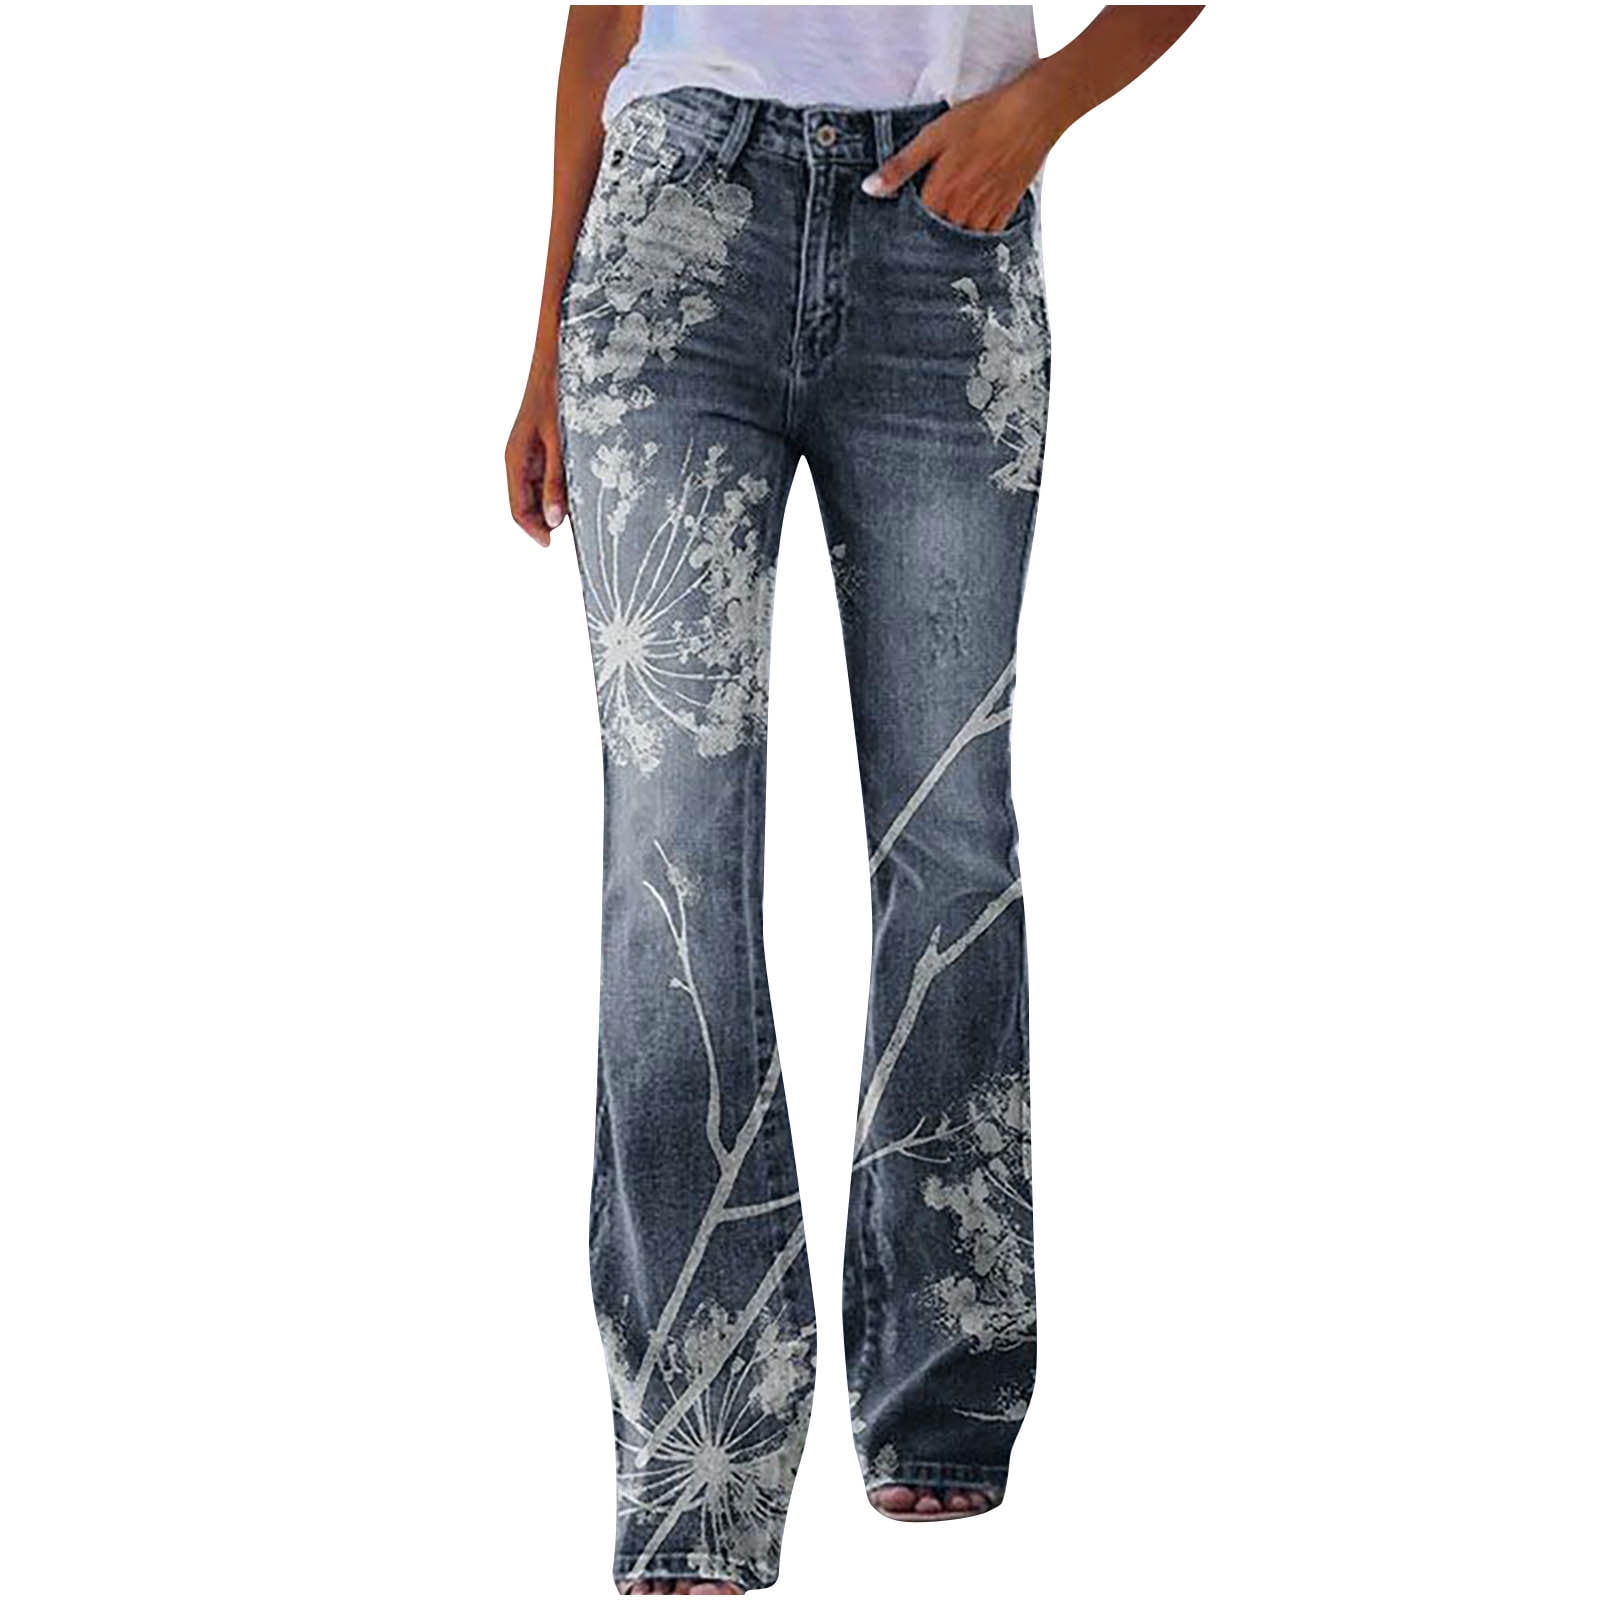 Mid Rise Jeans for Women Vintage Embroidery Floral Stretch Skinny Flare ...